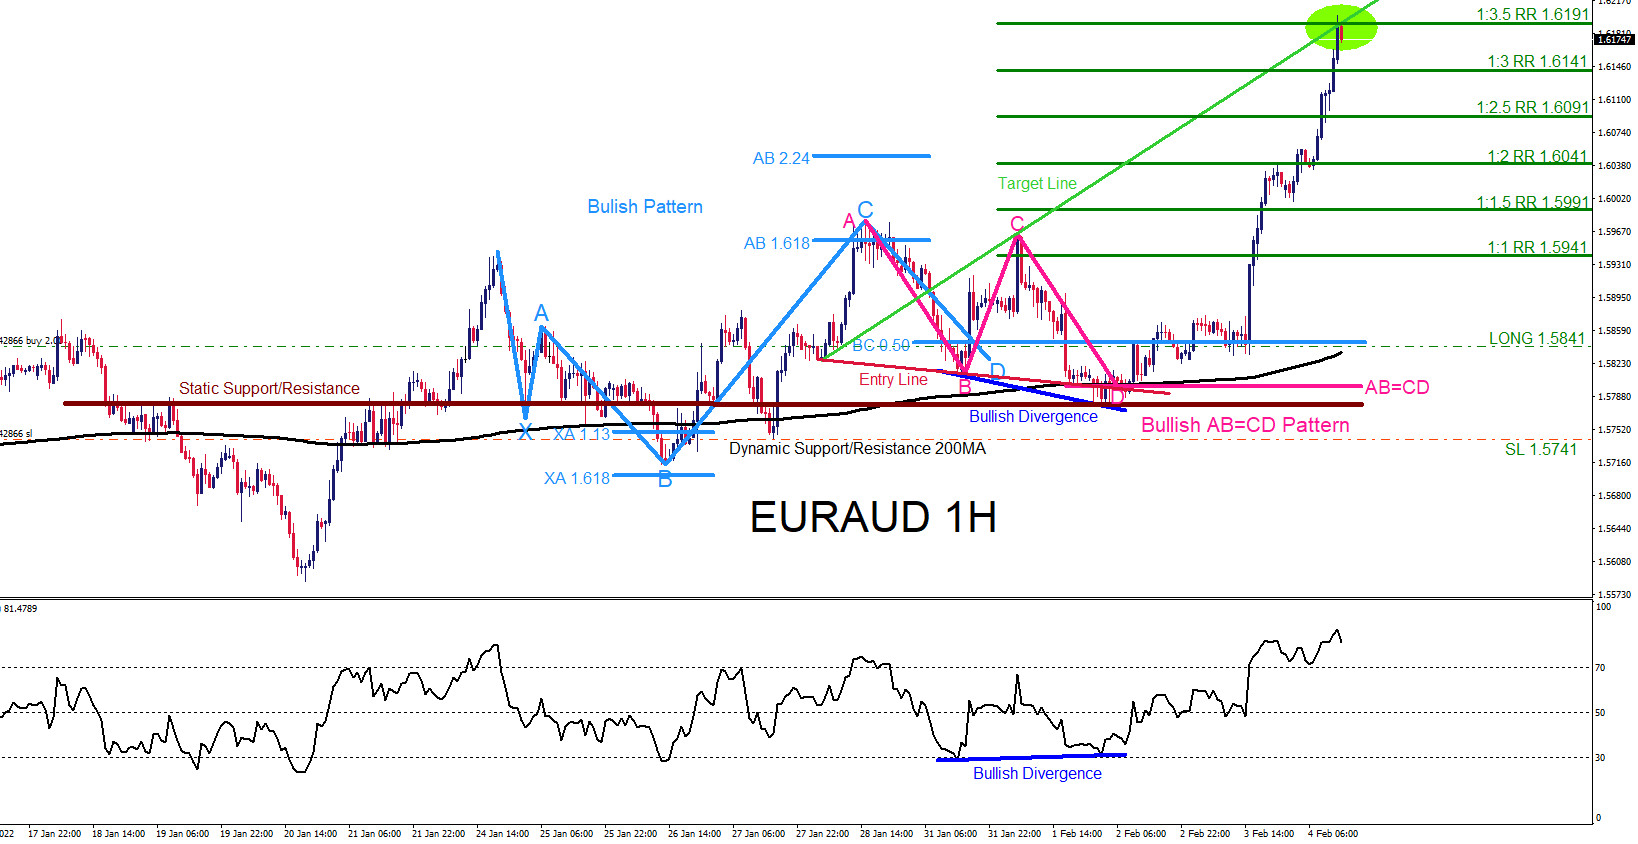 EURAUD : Trading the Move Higher